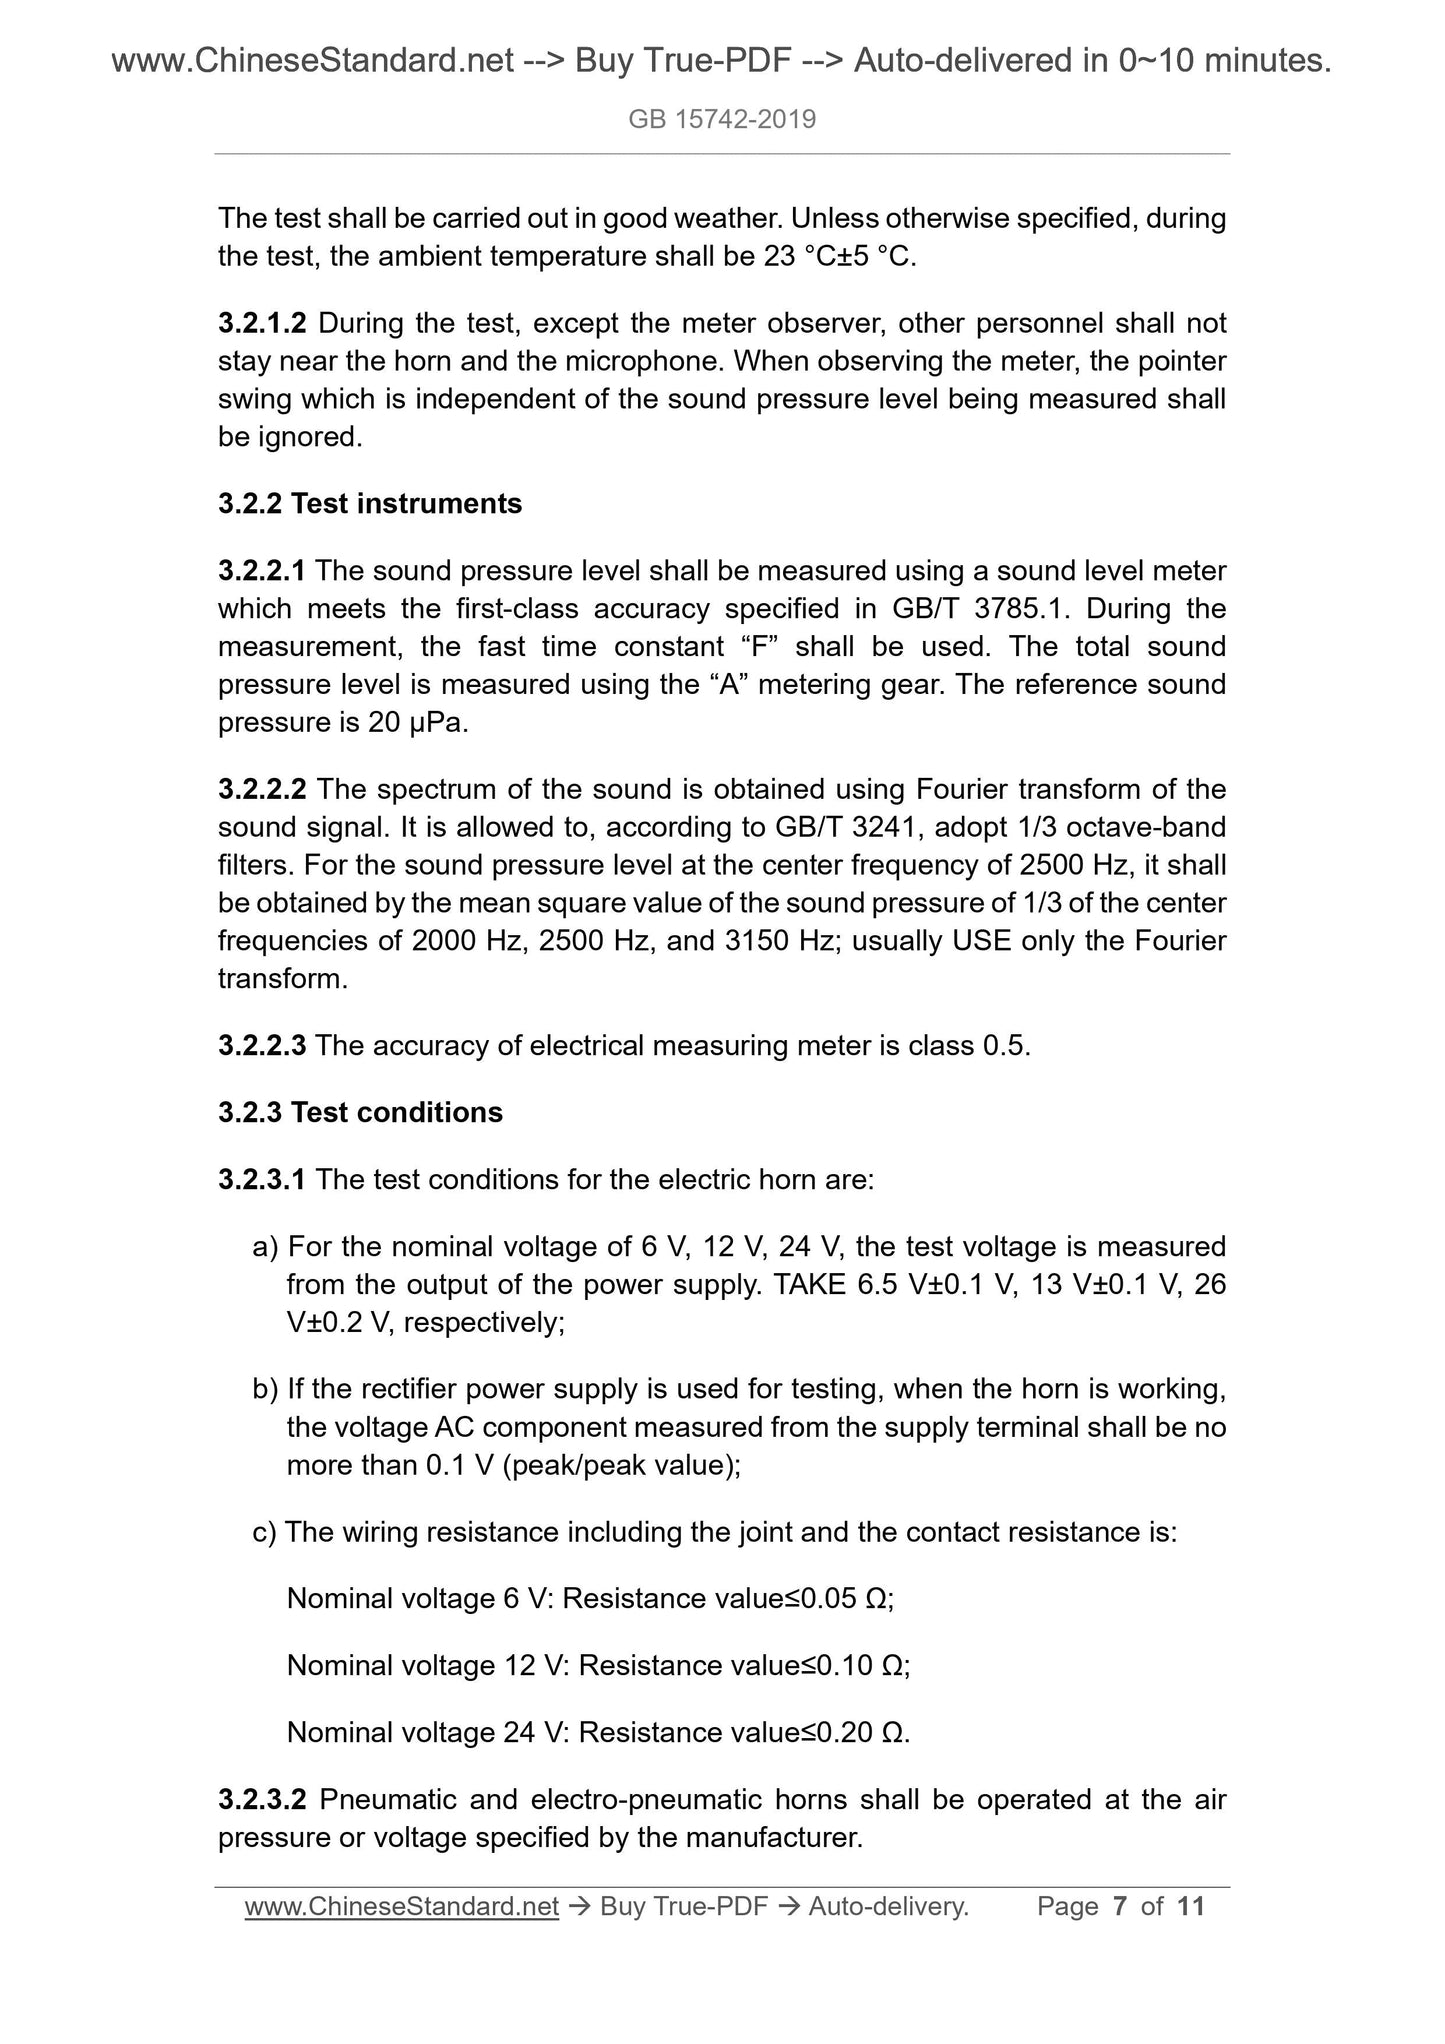 GB 15742-2019 Page 4